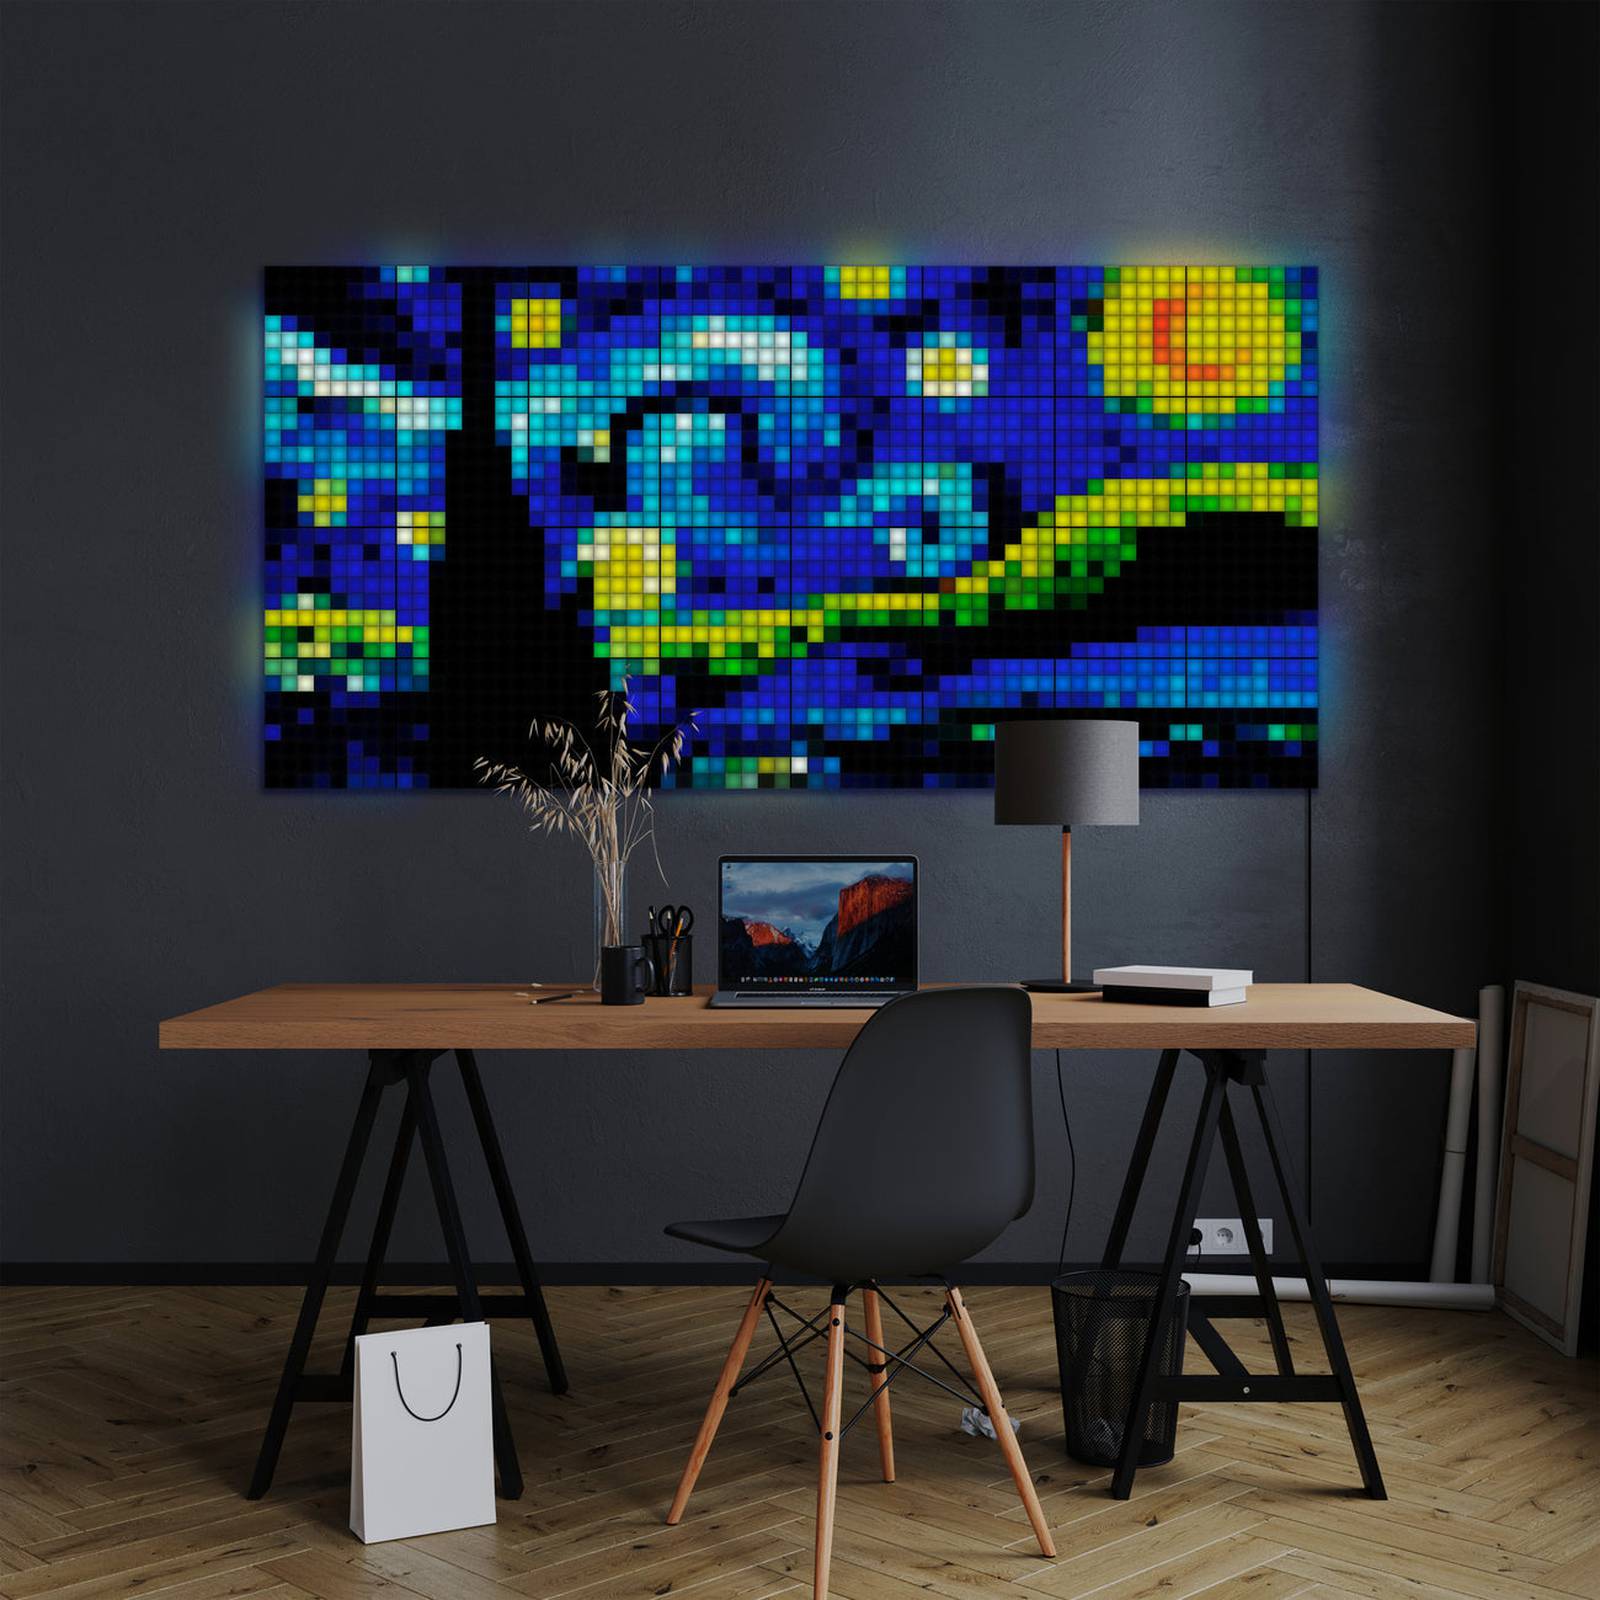 Digital art on the wall of an office - the art is created by small LED squares